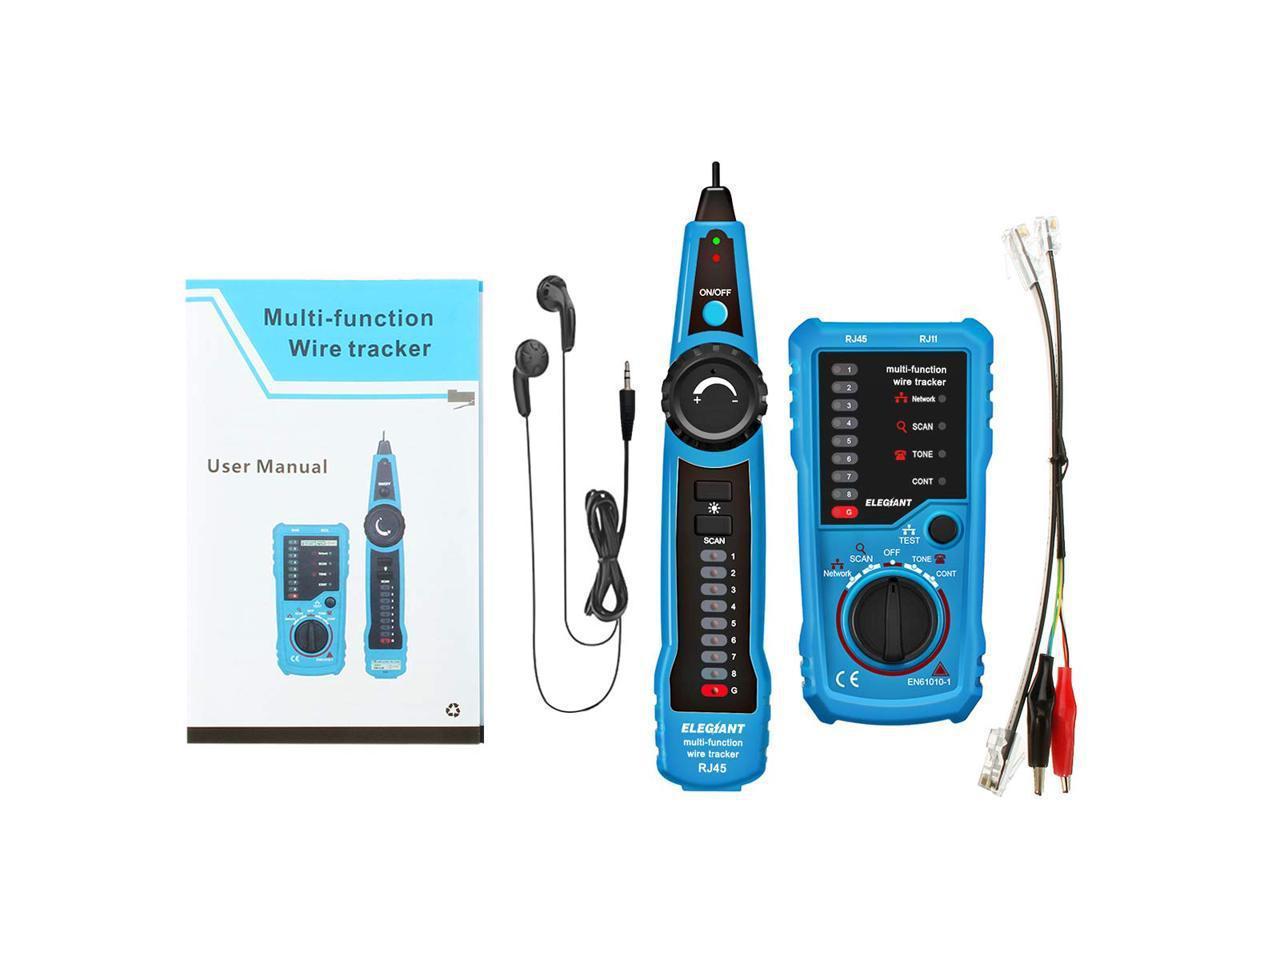 Internet Cable RJ11 RJ45 Telephone Wire Tracker Ethernet LAN Network Cable Tester Detector Line Finder LAN Cable